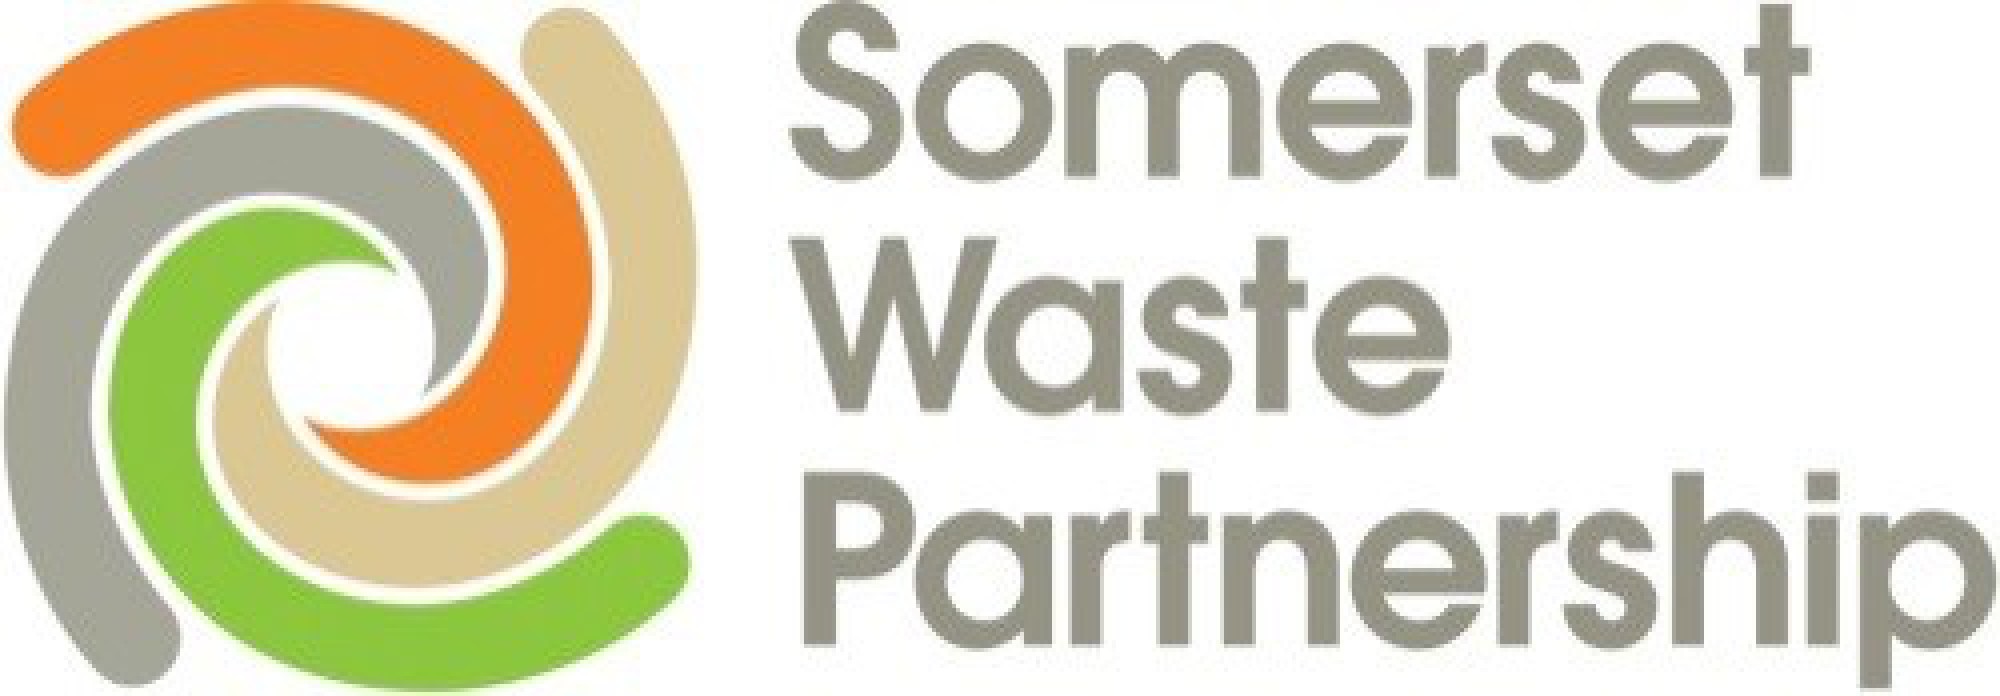 Information from Somerset Waste Partnership